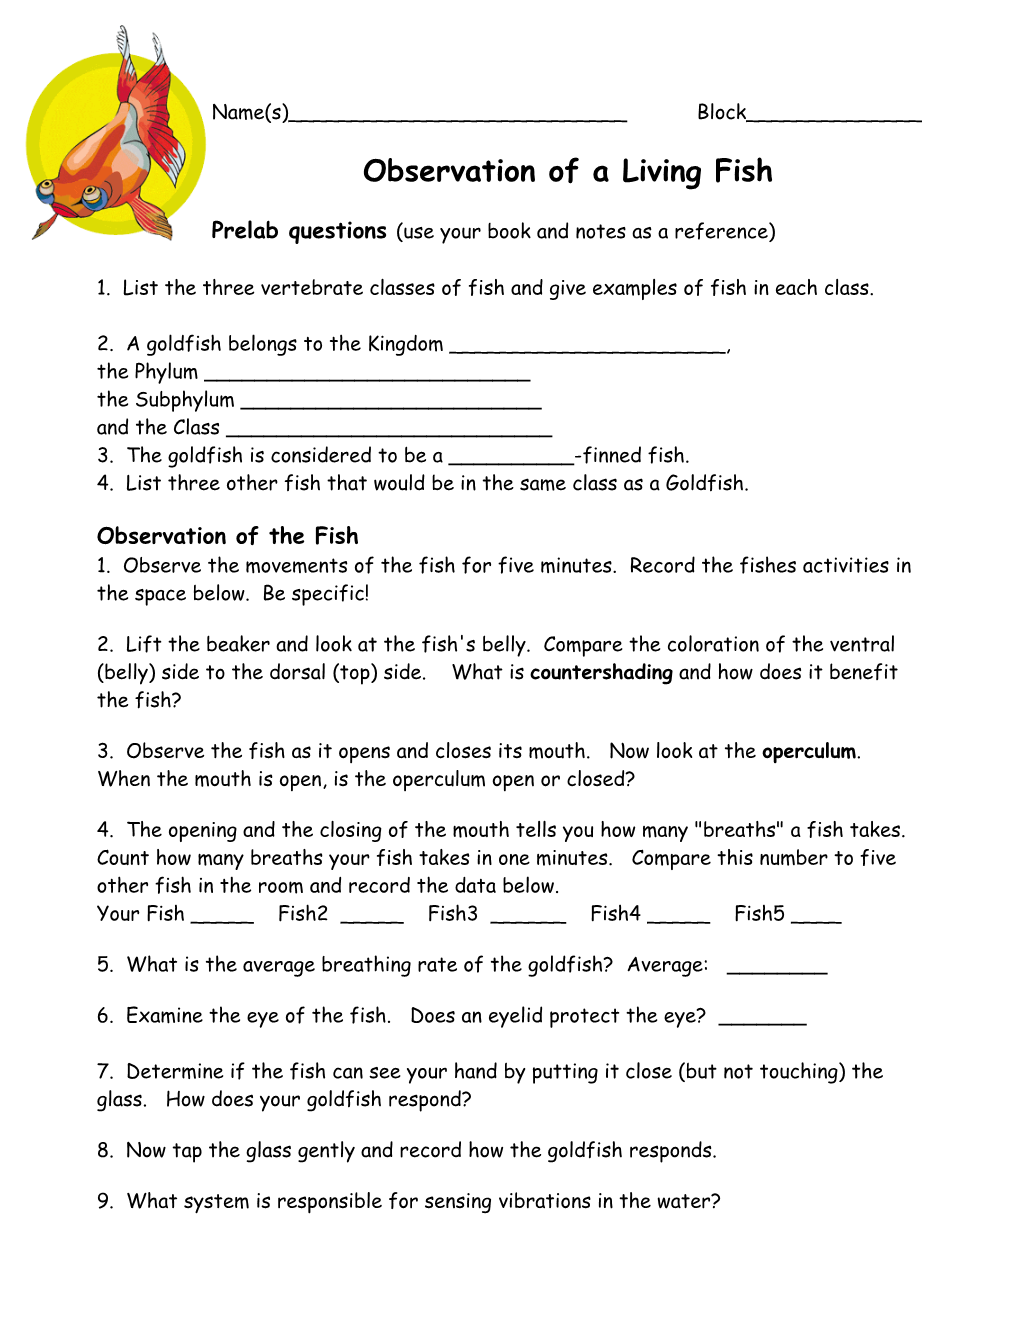 Observation of a Living Fish